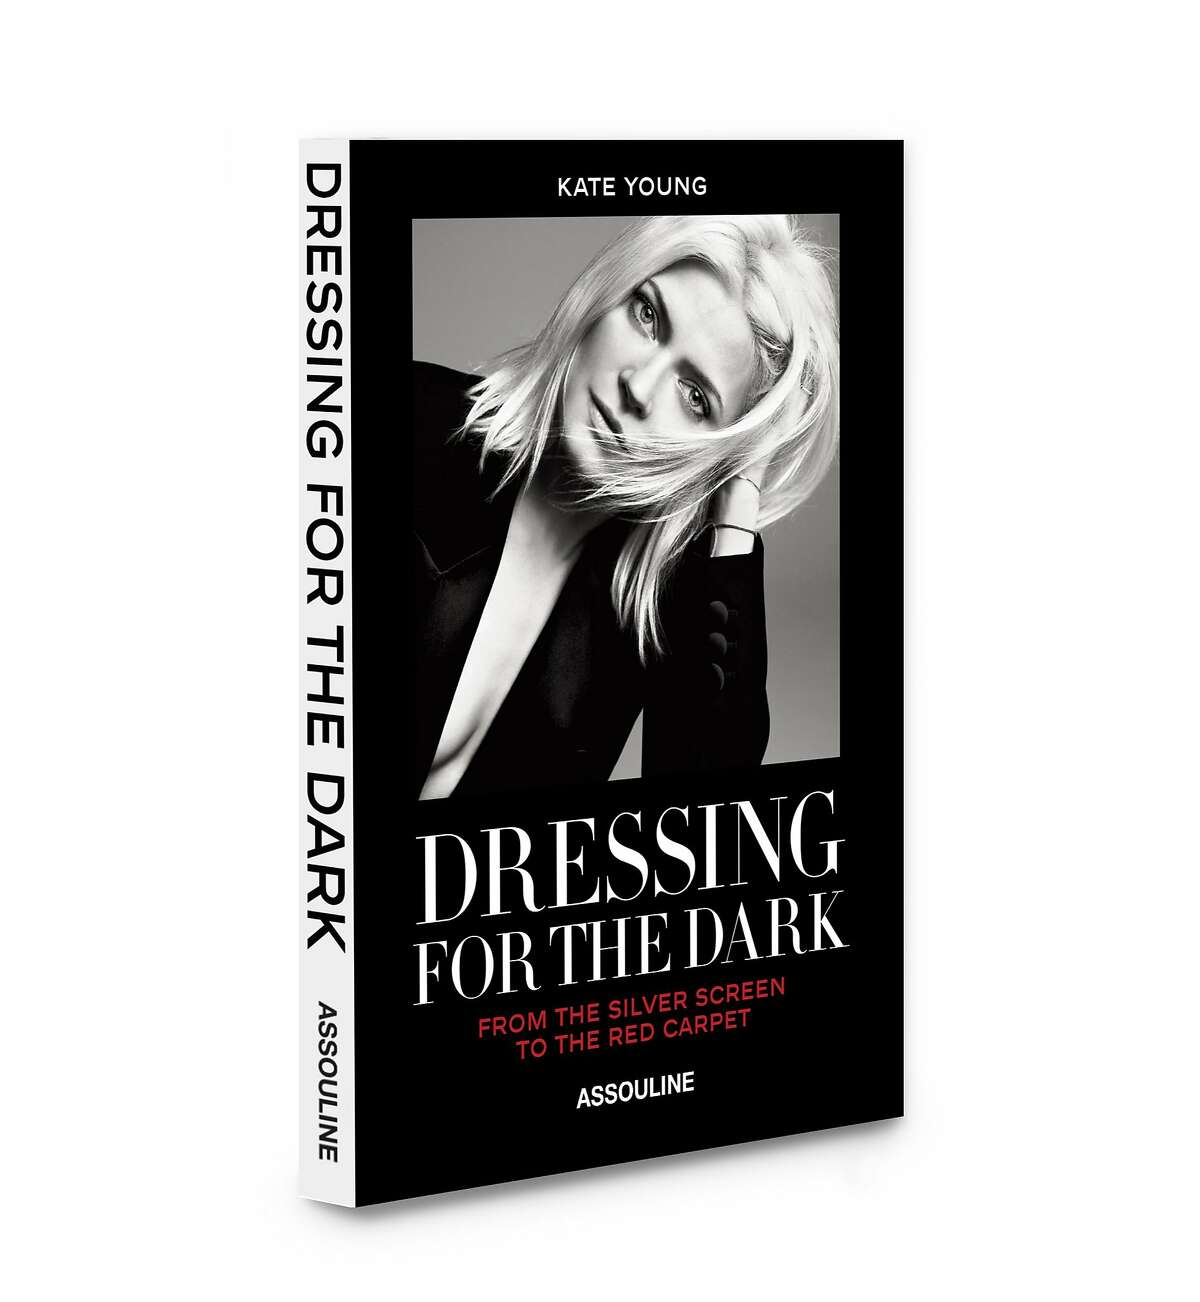 �Dressing For The Dark - Red Carpet Edition� (Assouline, $50) by celebrity stylist Kate Young